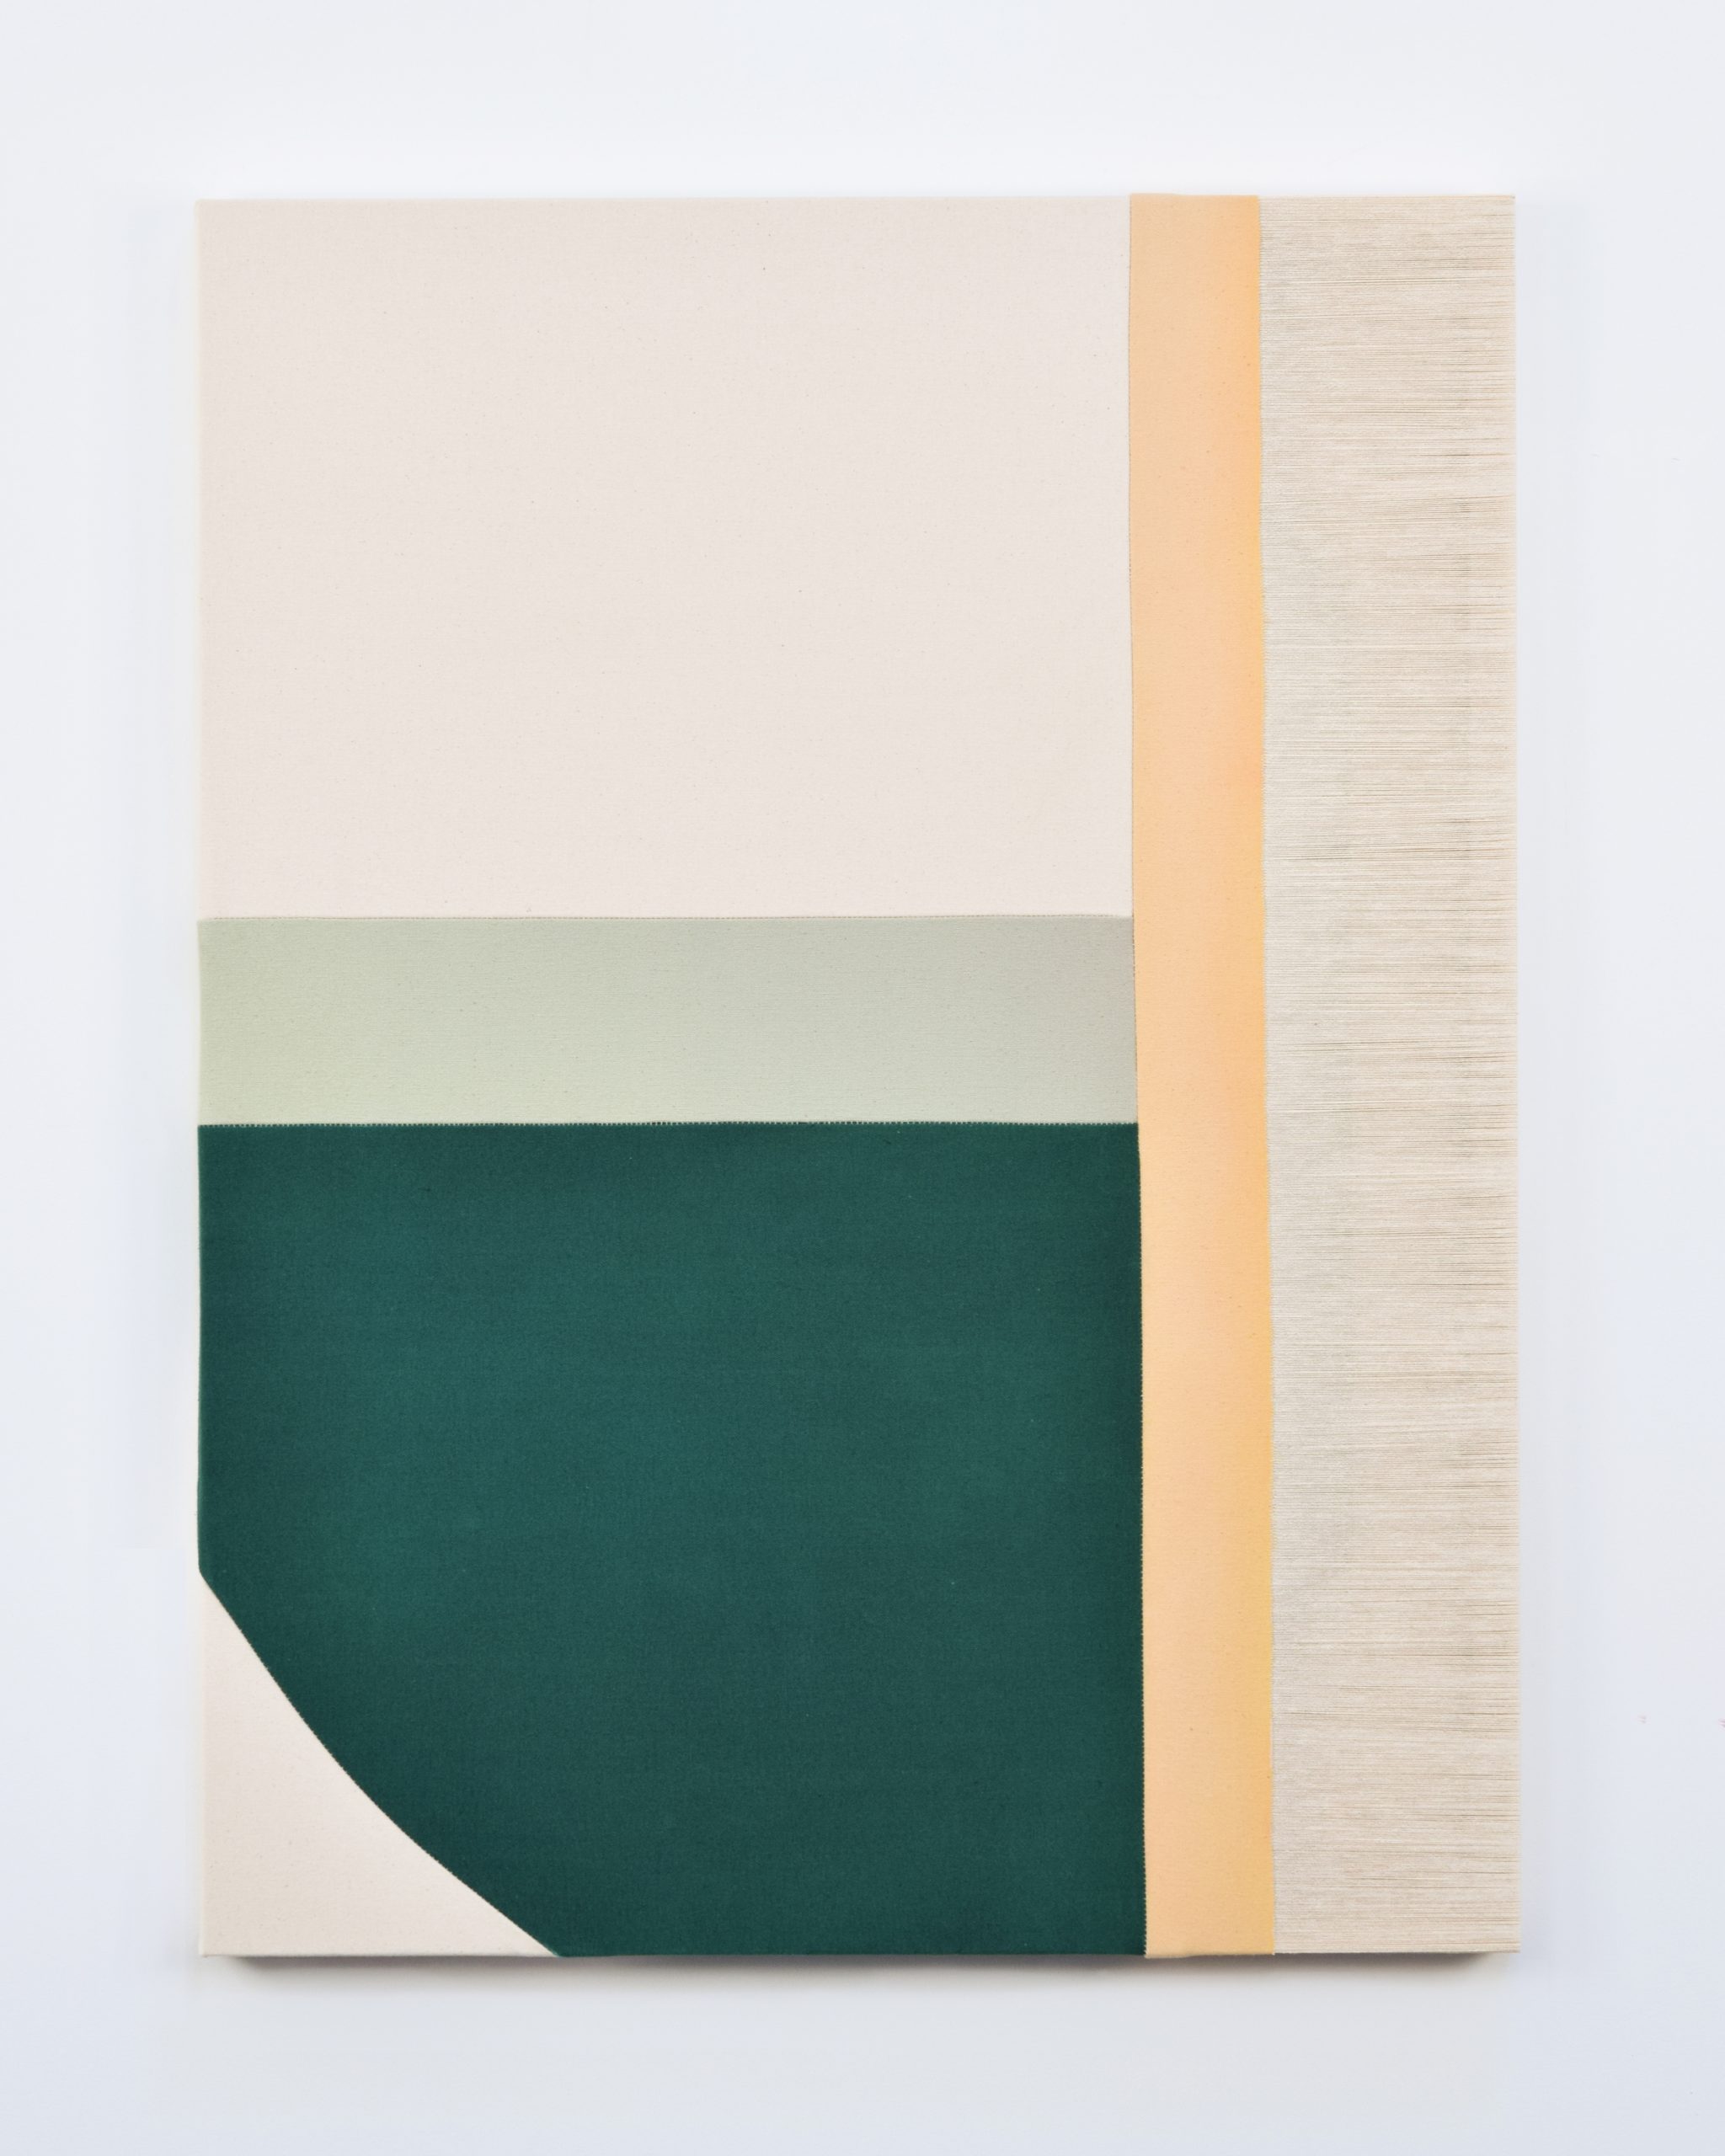 Rebecca Ward, green bowl, 2021, green bowl acrylic and dye on stitched canvas, 32 x 24 in